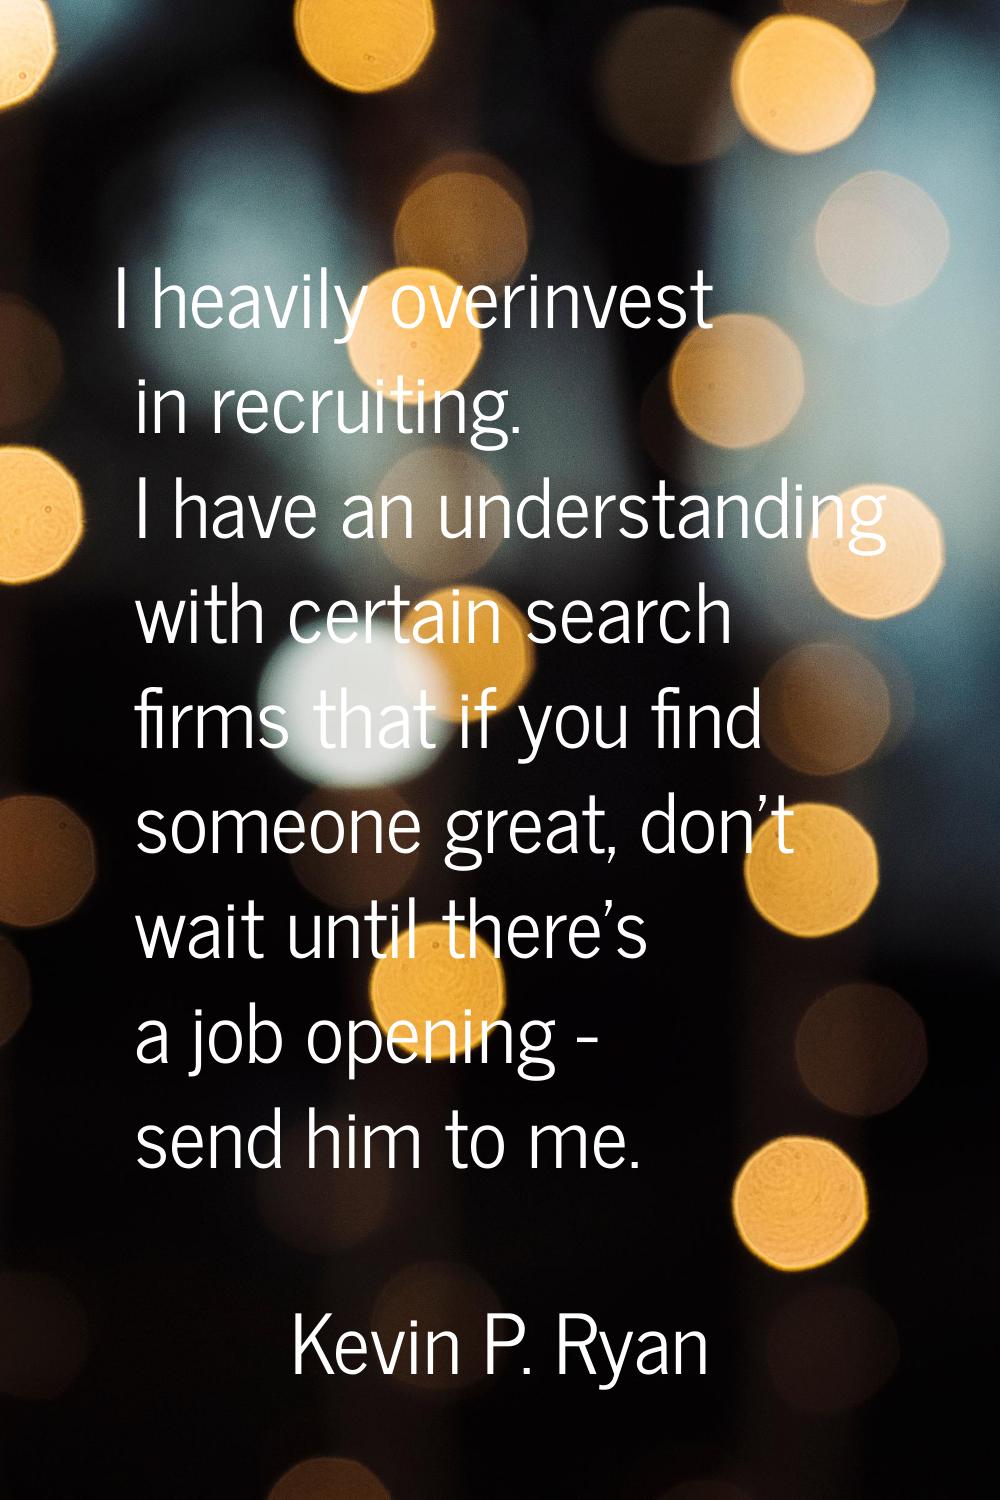 I heavily overinvest in recruiting. I have an understanding with certain search firms that if you f